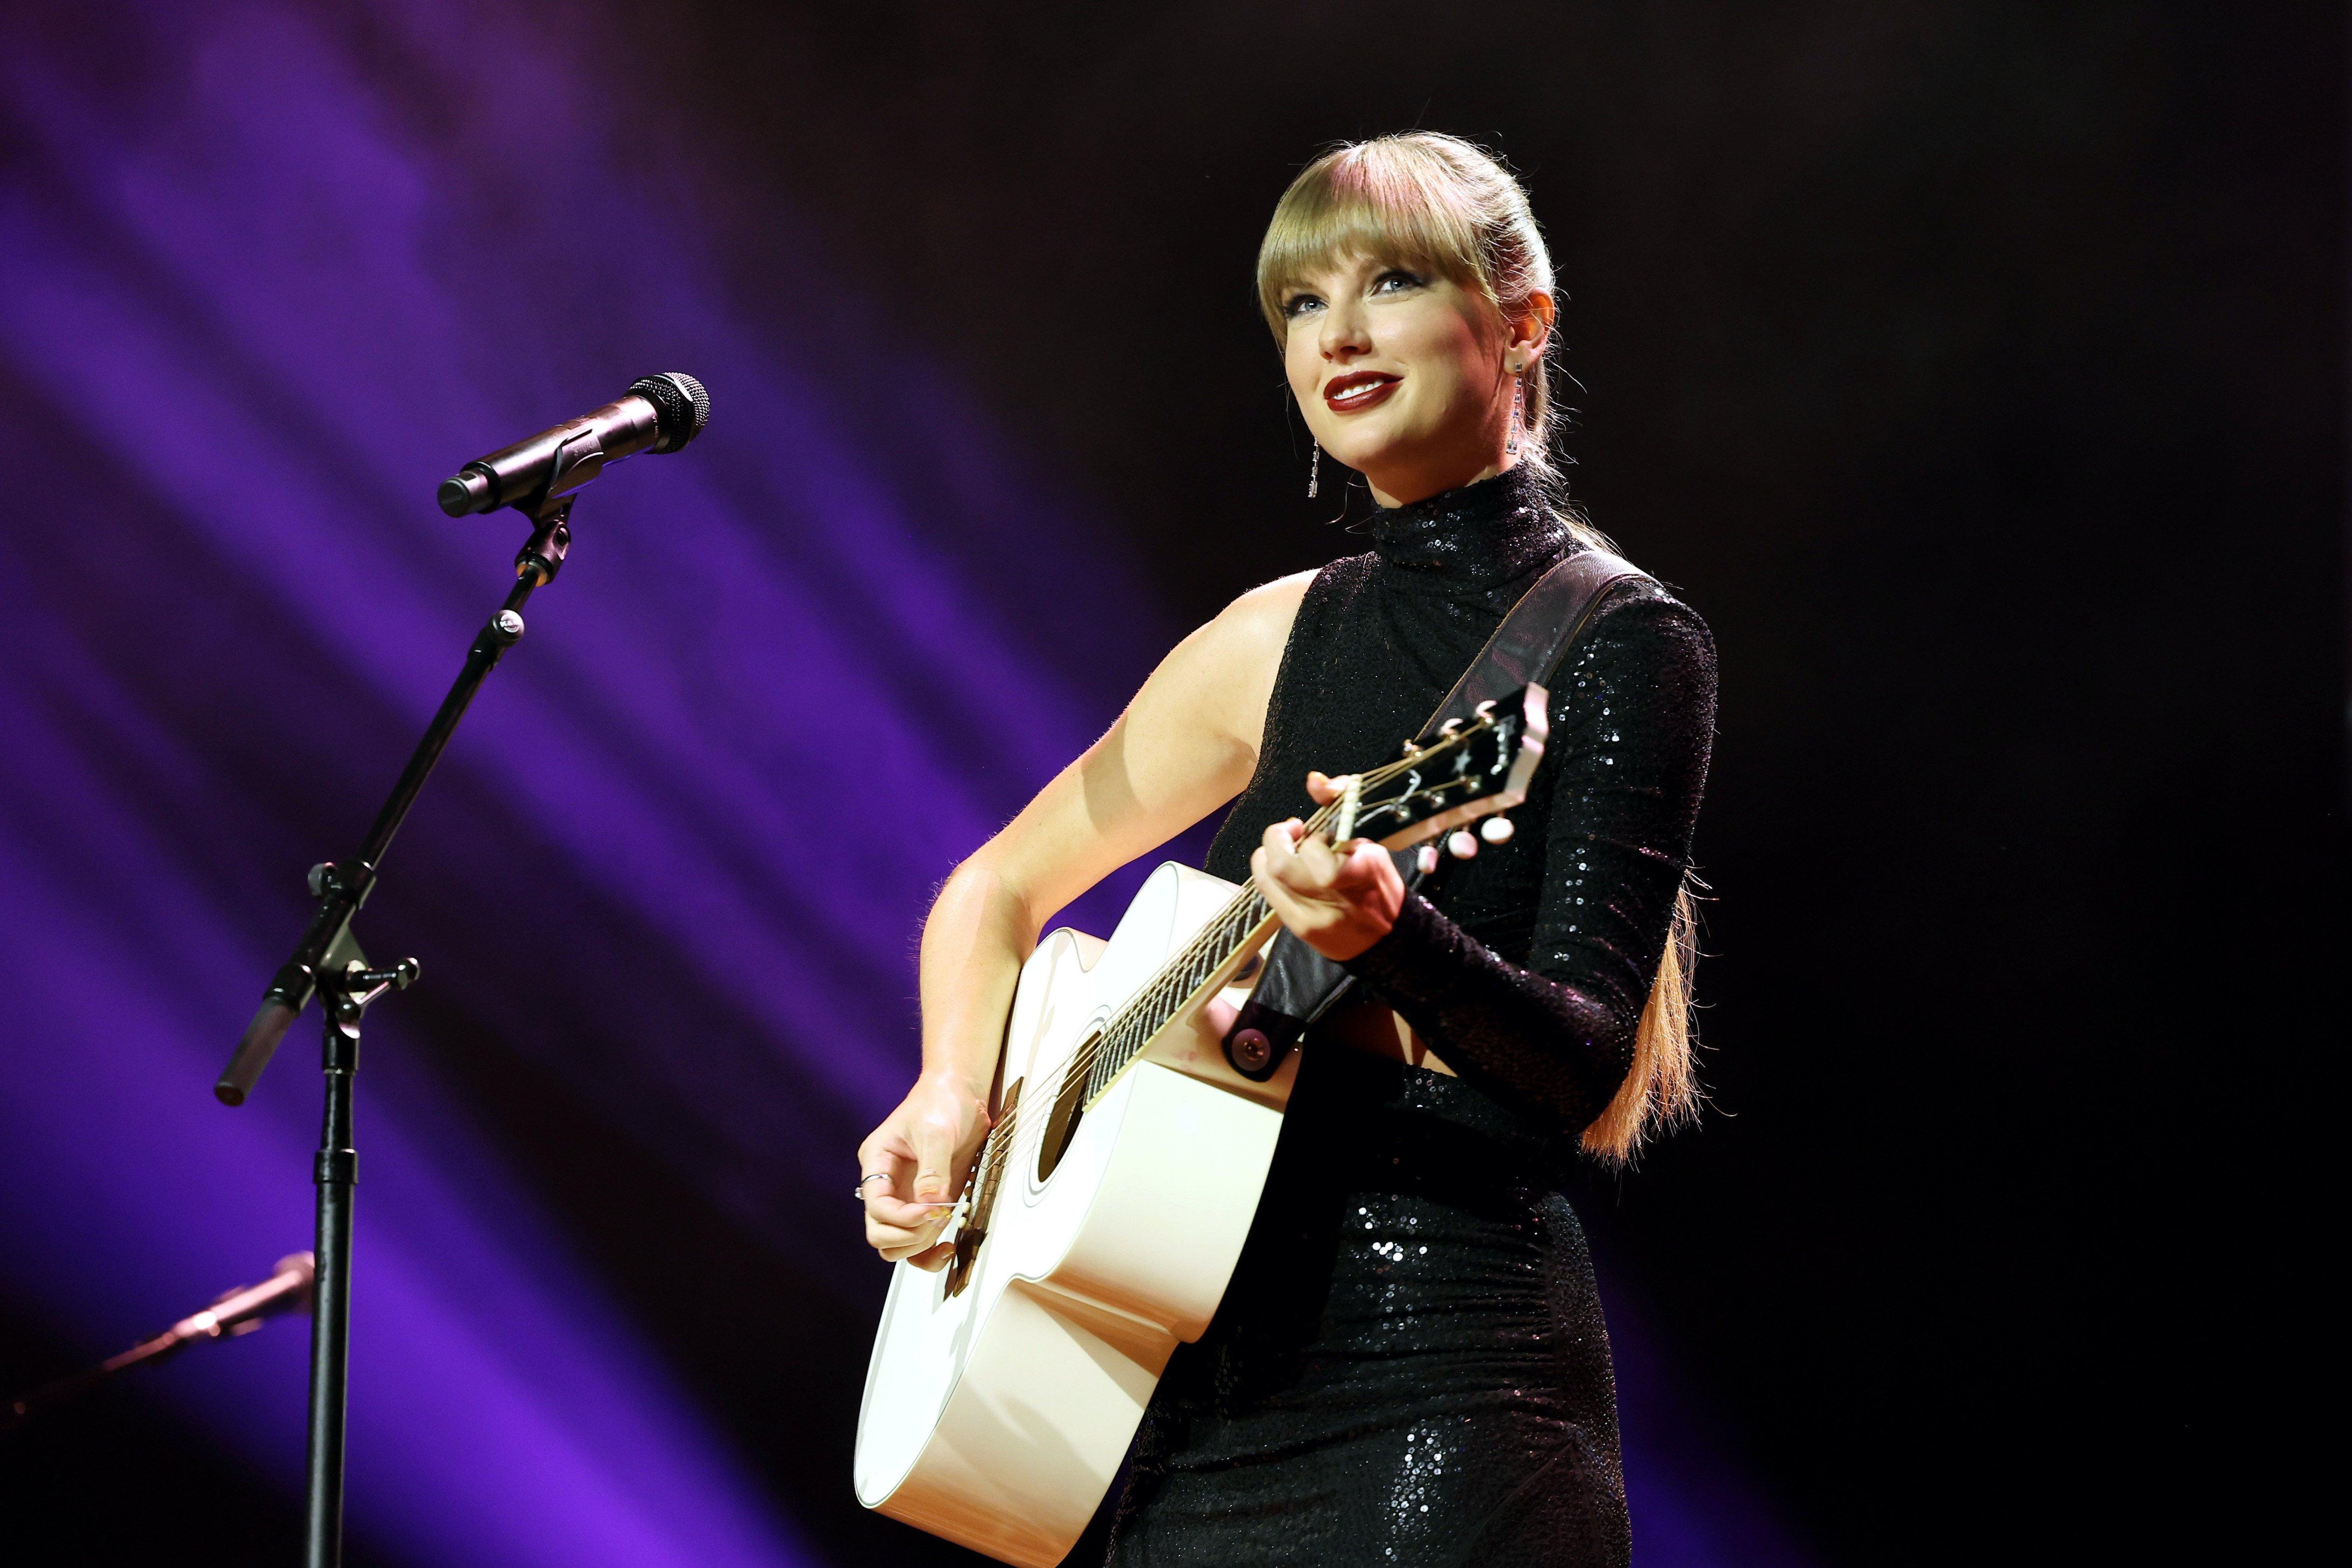 Before her billion dollar Era's Tour, Taylor Swift put in absolute